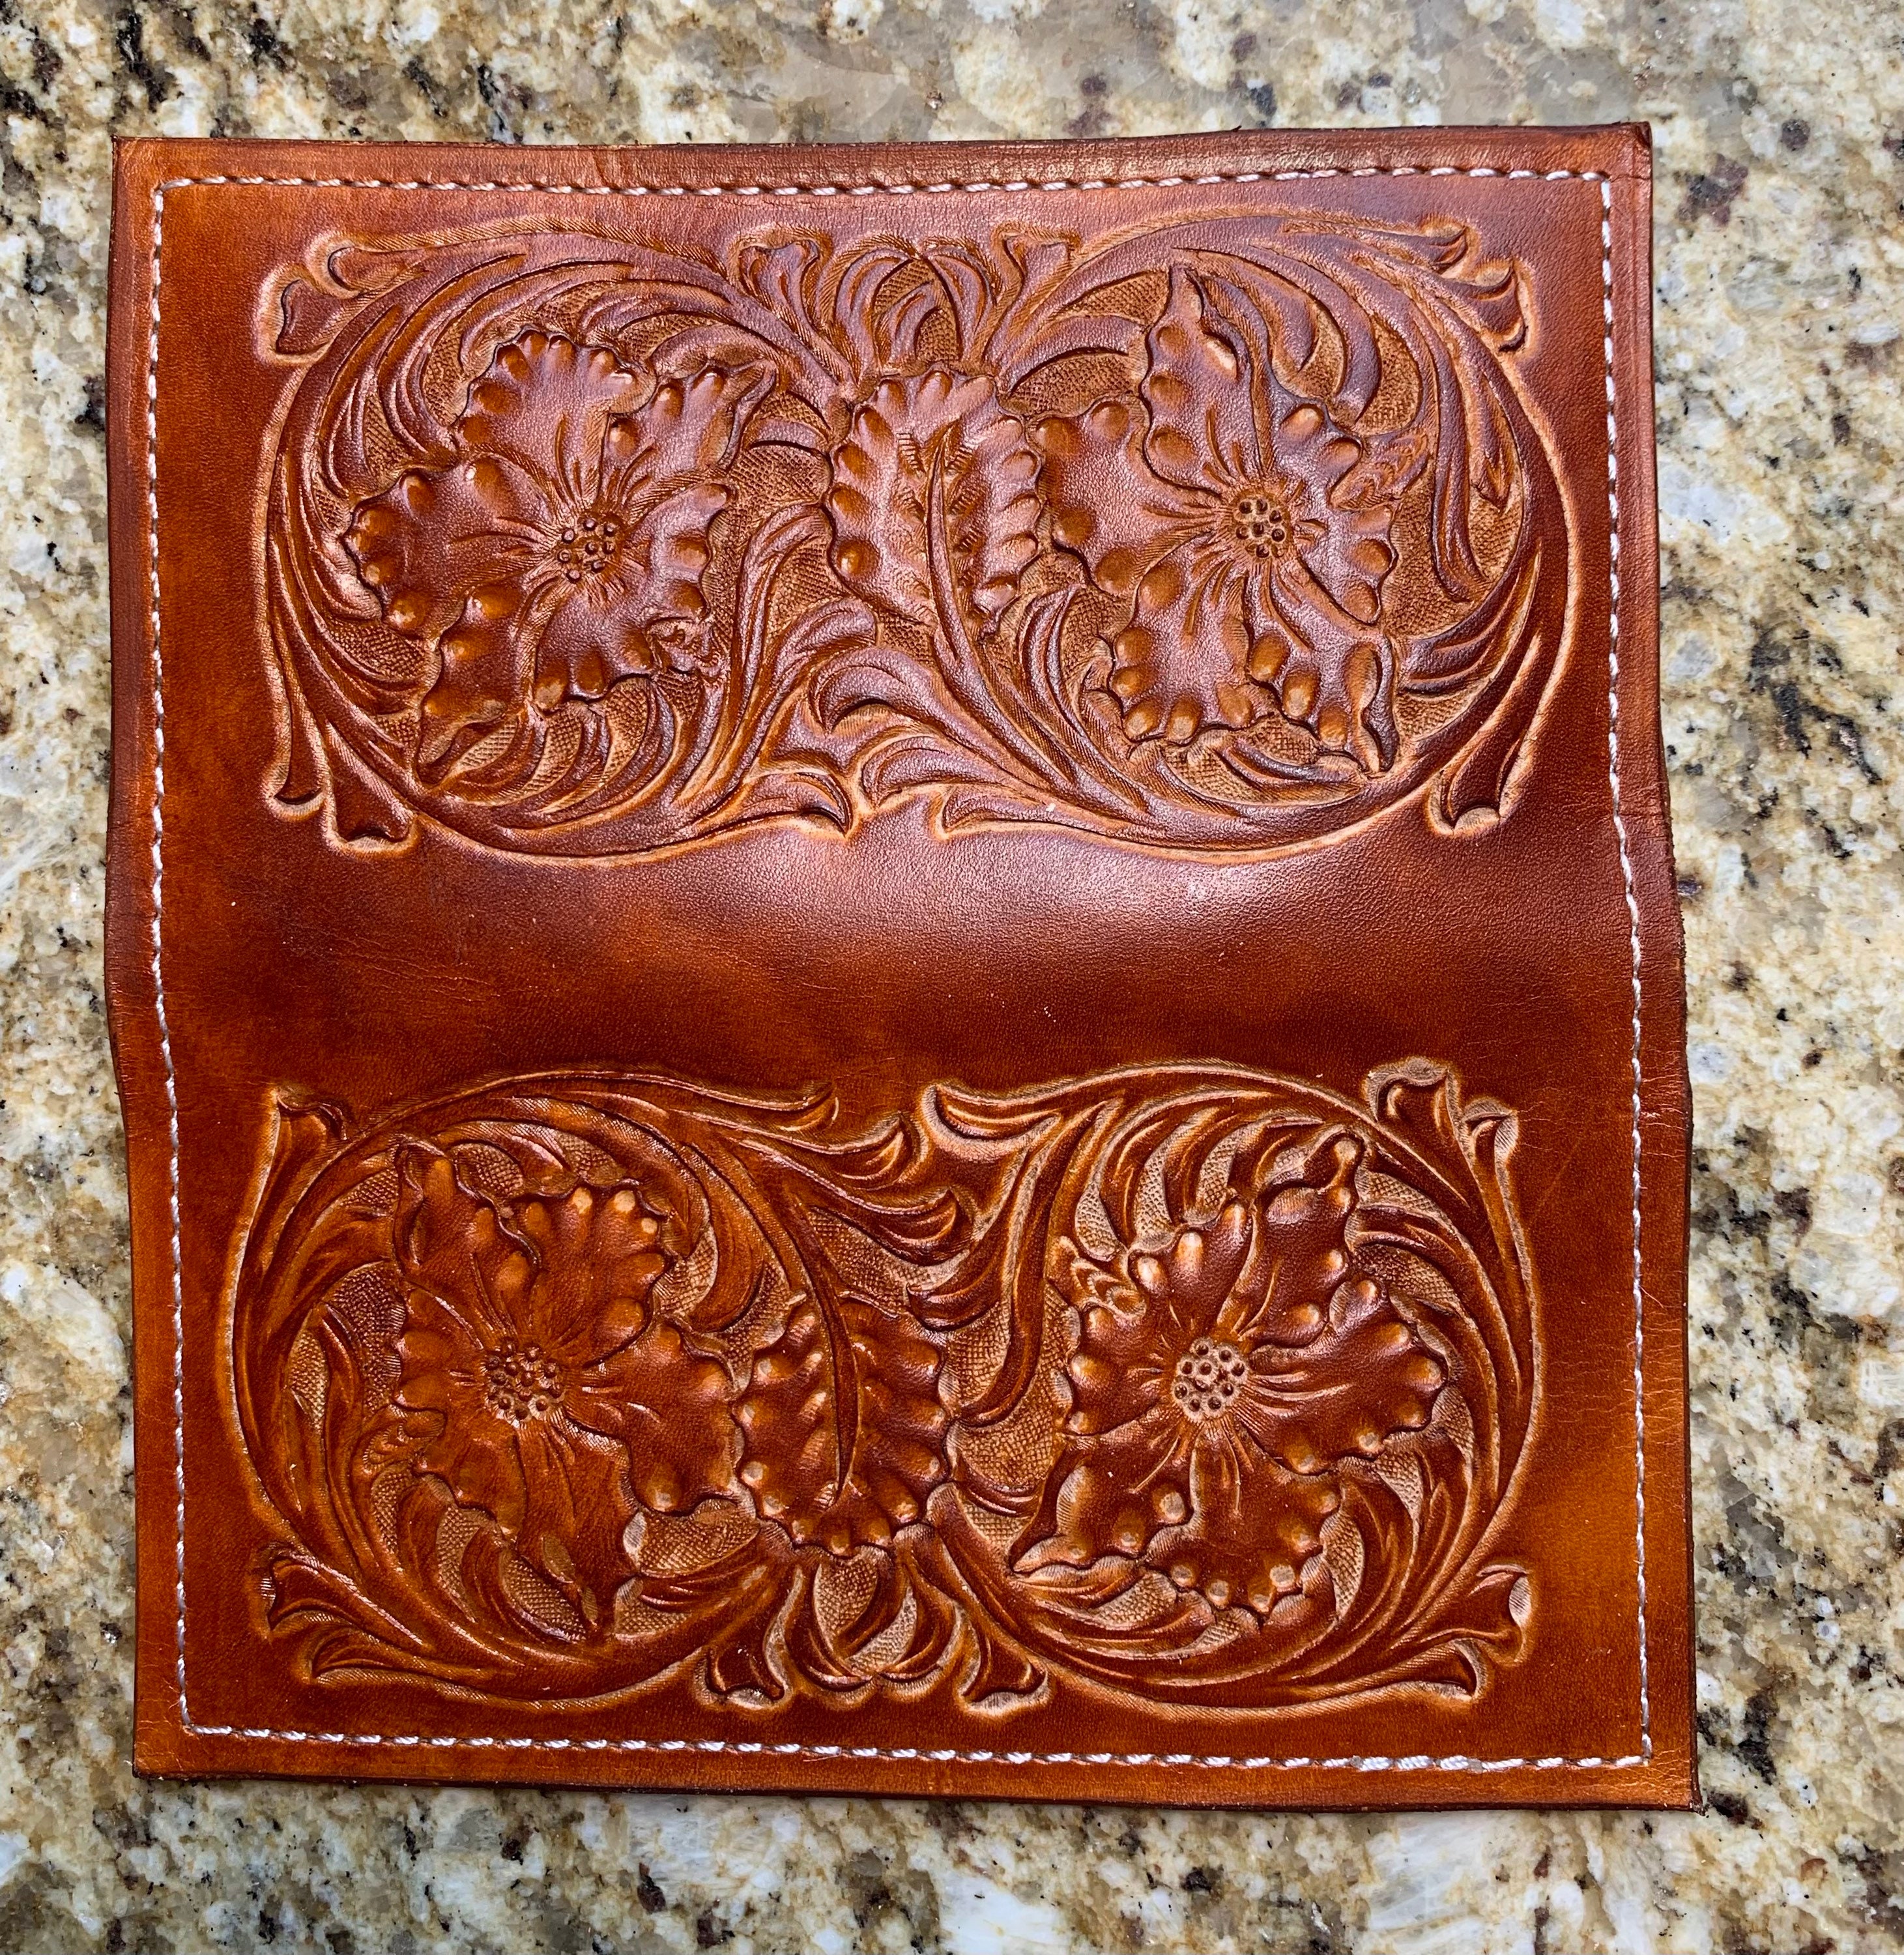  Men's 3D Genuine Leather Wallet, Hand-Carved, Hand-Painted,  Leather Carving, Custom wallet, Personalized wallet, Deer wallet,  Outdoorsman : Handmade Products